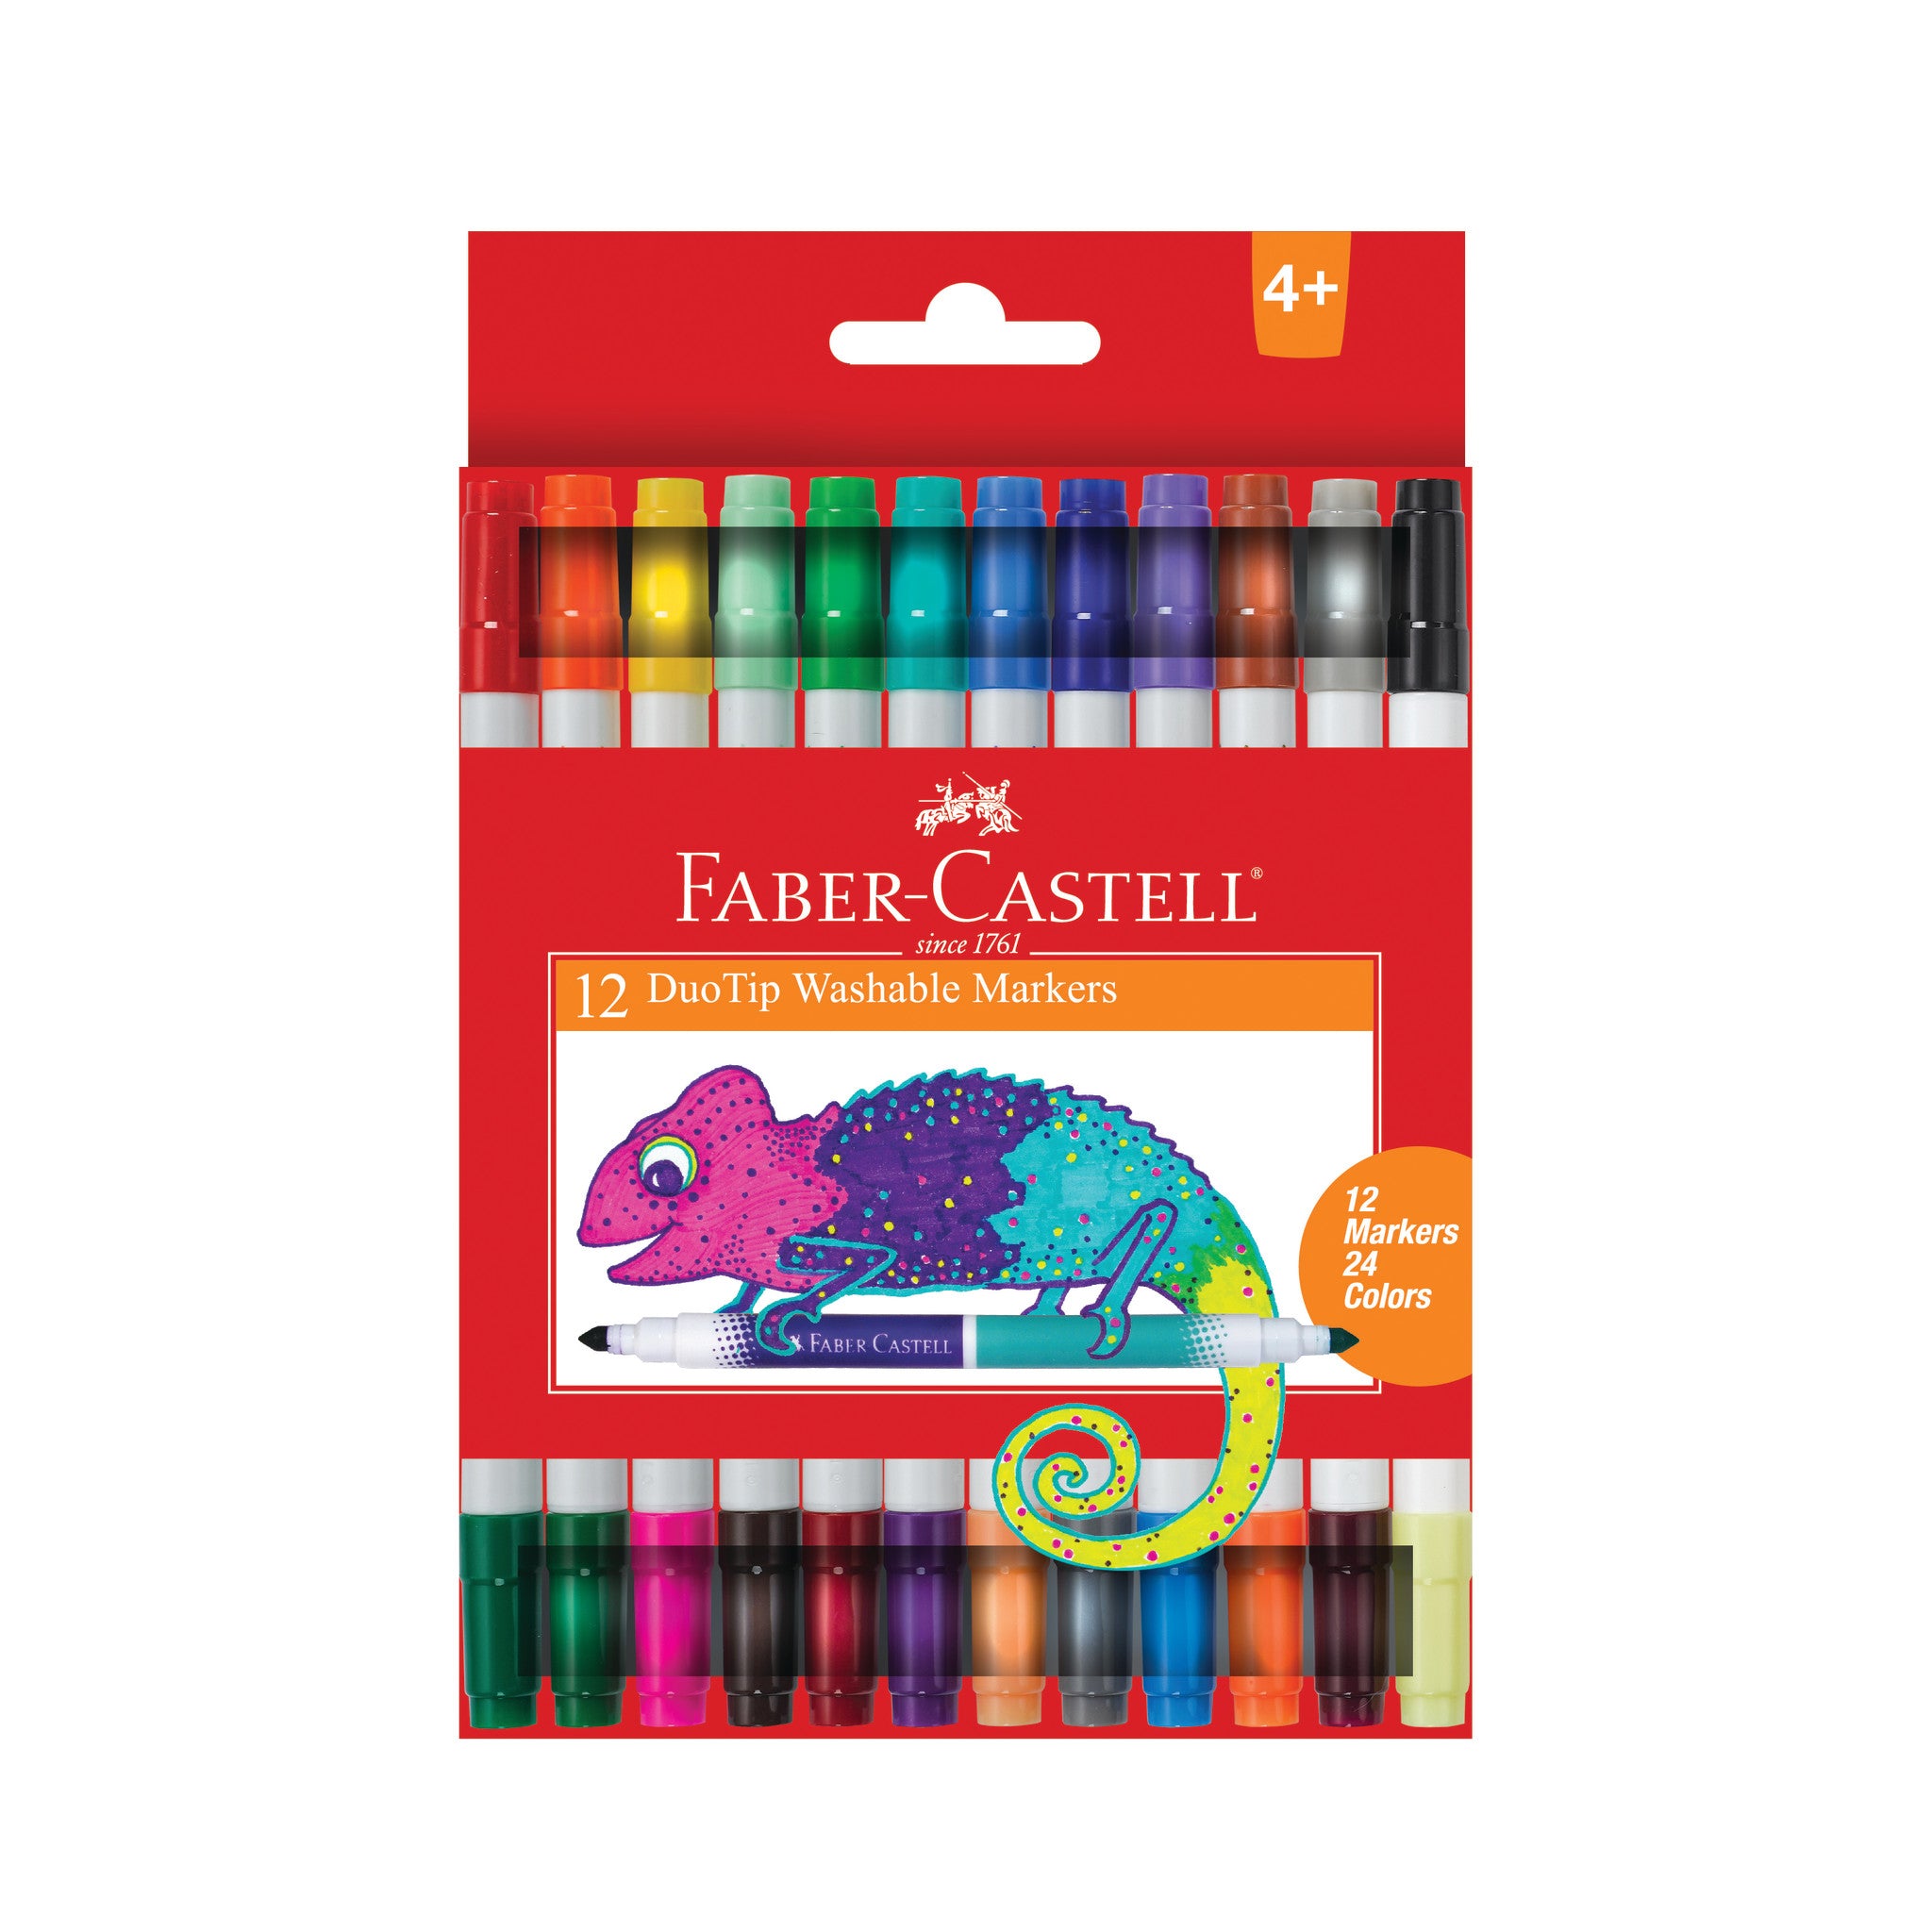 Elephant Steps on Instagram: Washable Marker Normal Tip 12 colors 🎨Our  washable markers for kids set contains 12 count broad line coloring  markers: Washable ink; and Easily Wipes Off Skin, Clothes,desk.Mess free